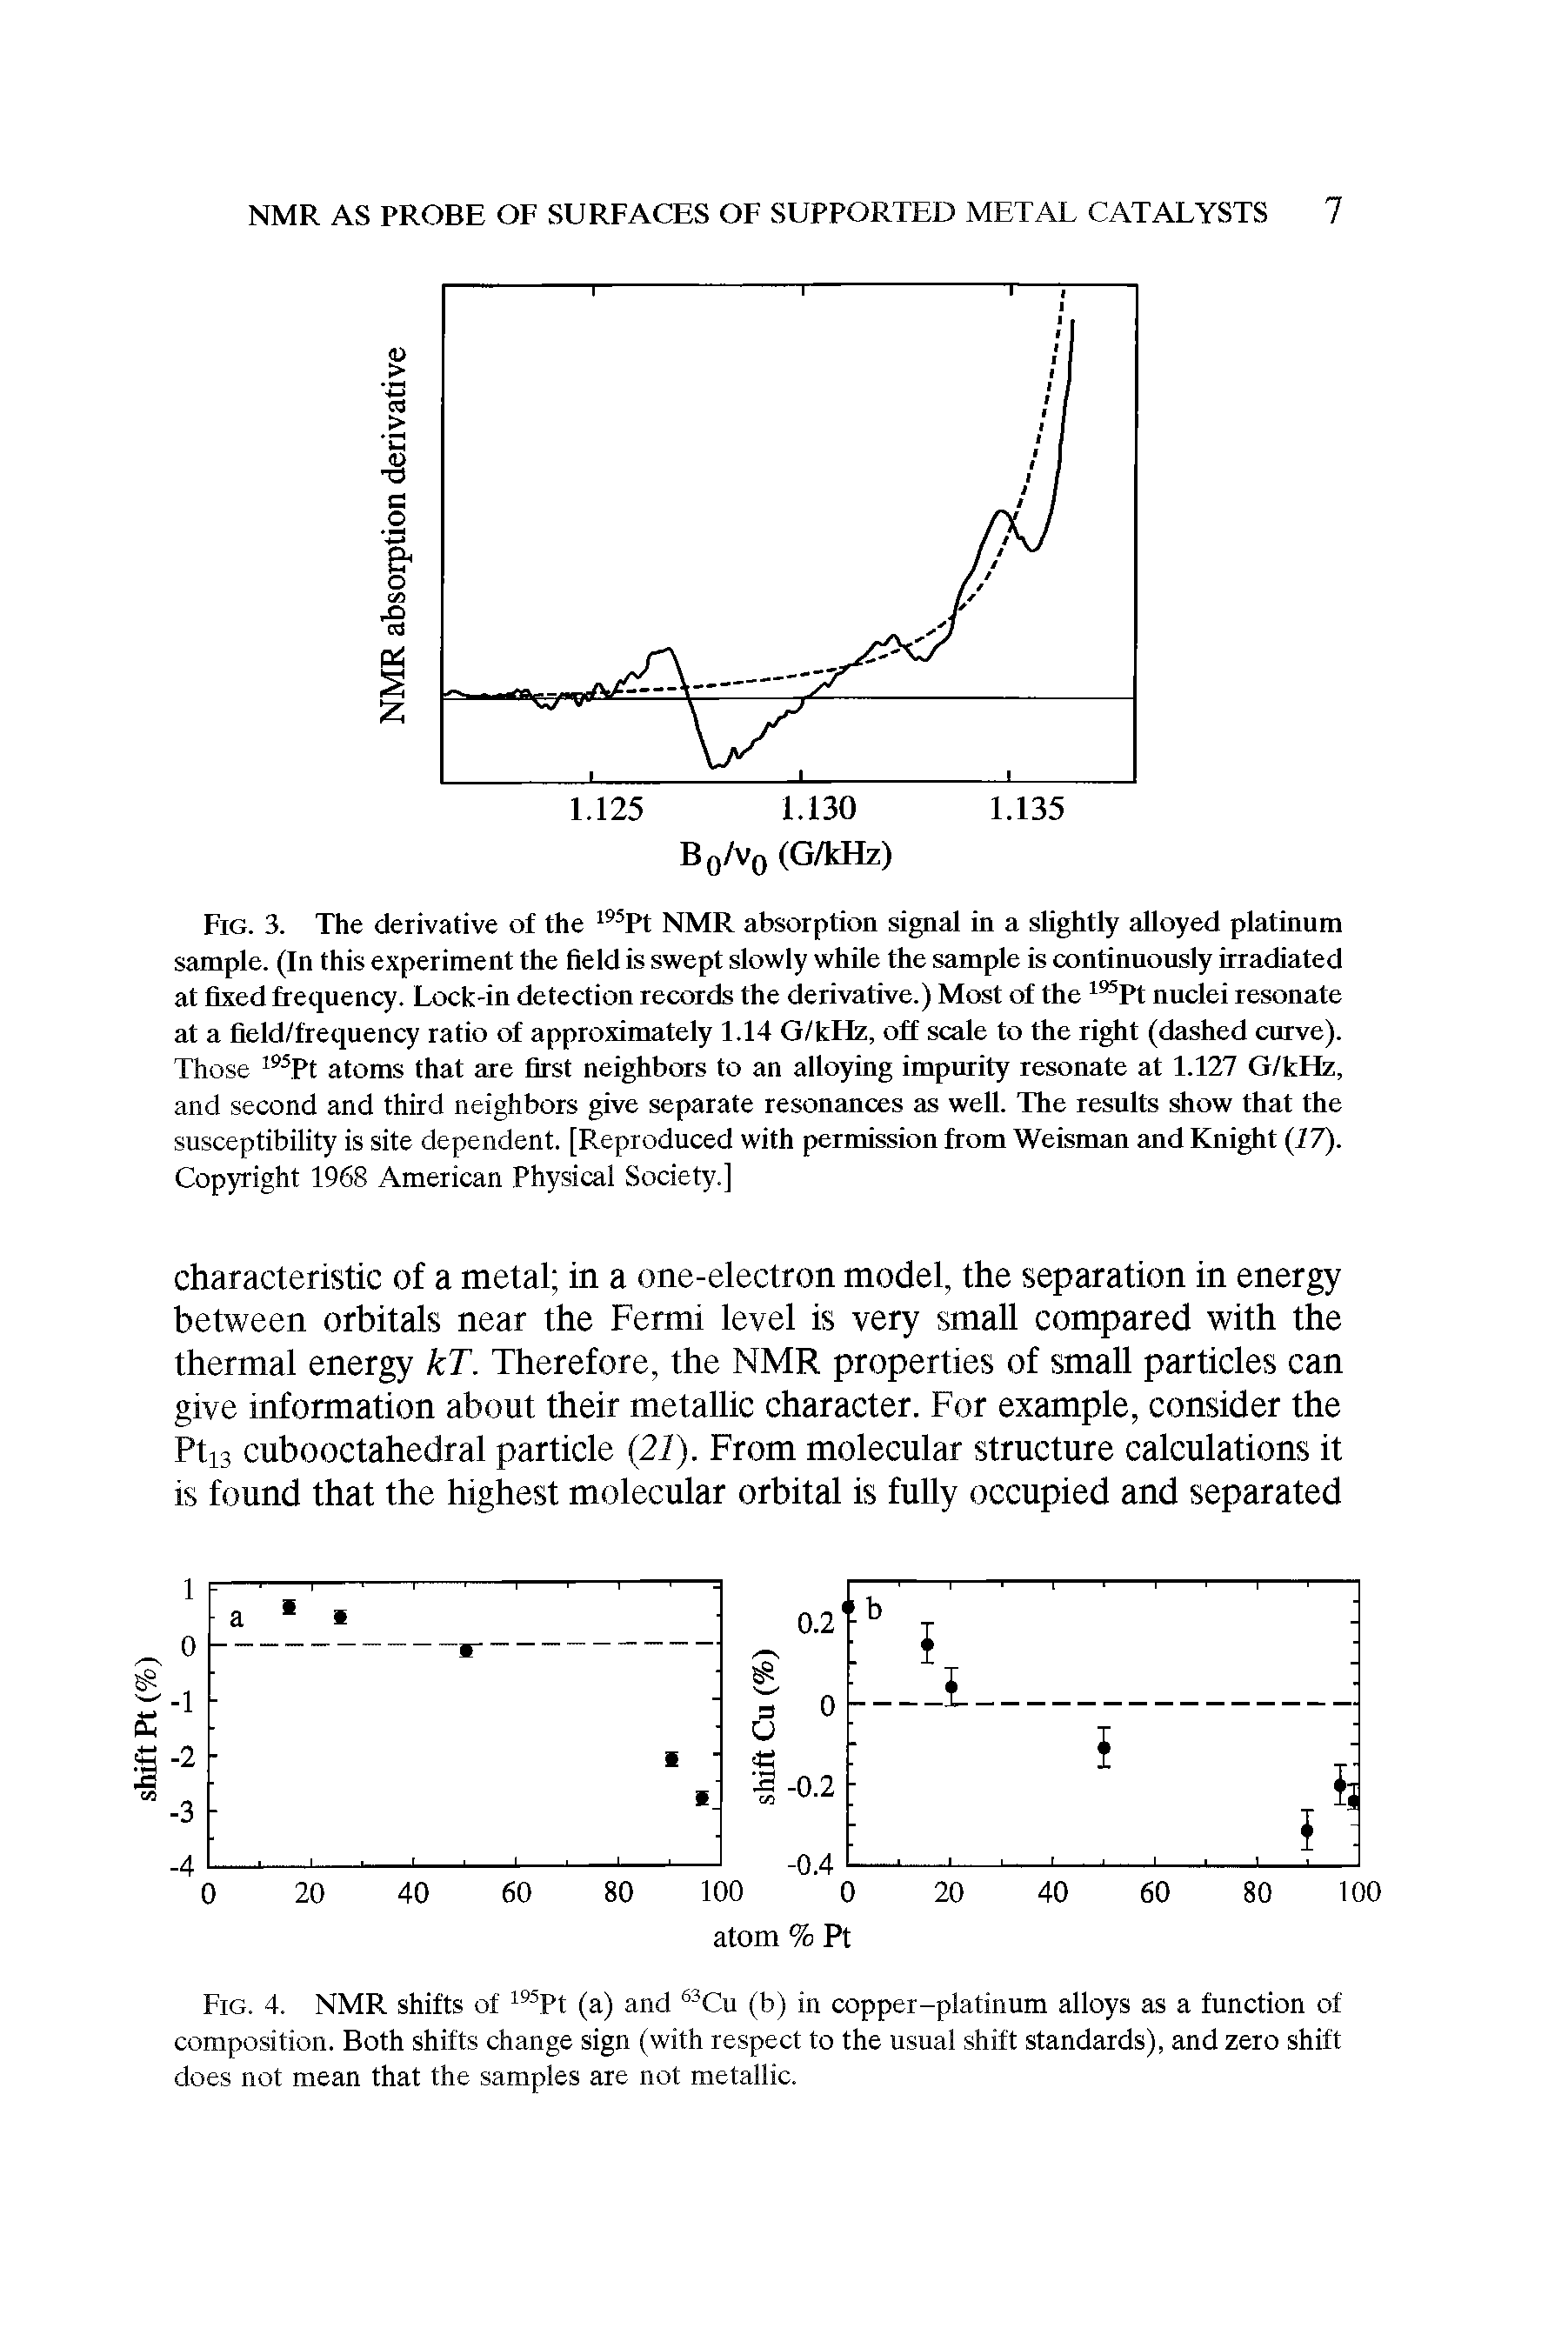 Fig. 3. The derivative of the Pt NMR absorption signal in a slightly alloyed platinum sample. (In this experiment the field is swept slowly while the sample is continuously irradiated at fixed frequency. Lock-in detection records the derivative.) Most of the Pt nuclei resonate at a field/frequency ratio of approximately 1.14 G/kUz, oft scale to the right (dashed curve). Those Pt atoms that are first neighbors to an alloying impurity resonate at 1.127 G/kUz, and second and third neighbors give separate resonances as well. The results show that the susceptibility is site dependent. [Reproduced with permission from Weisman and Knight (77). Copyright 1968 American Physical Society.]...